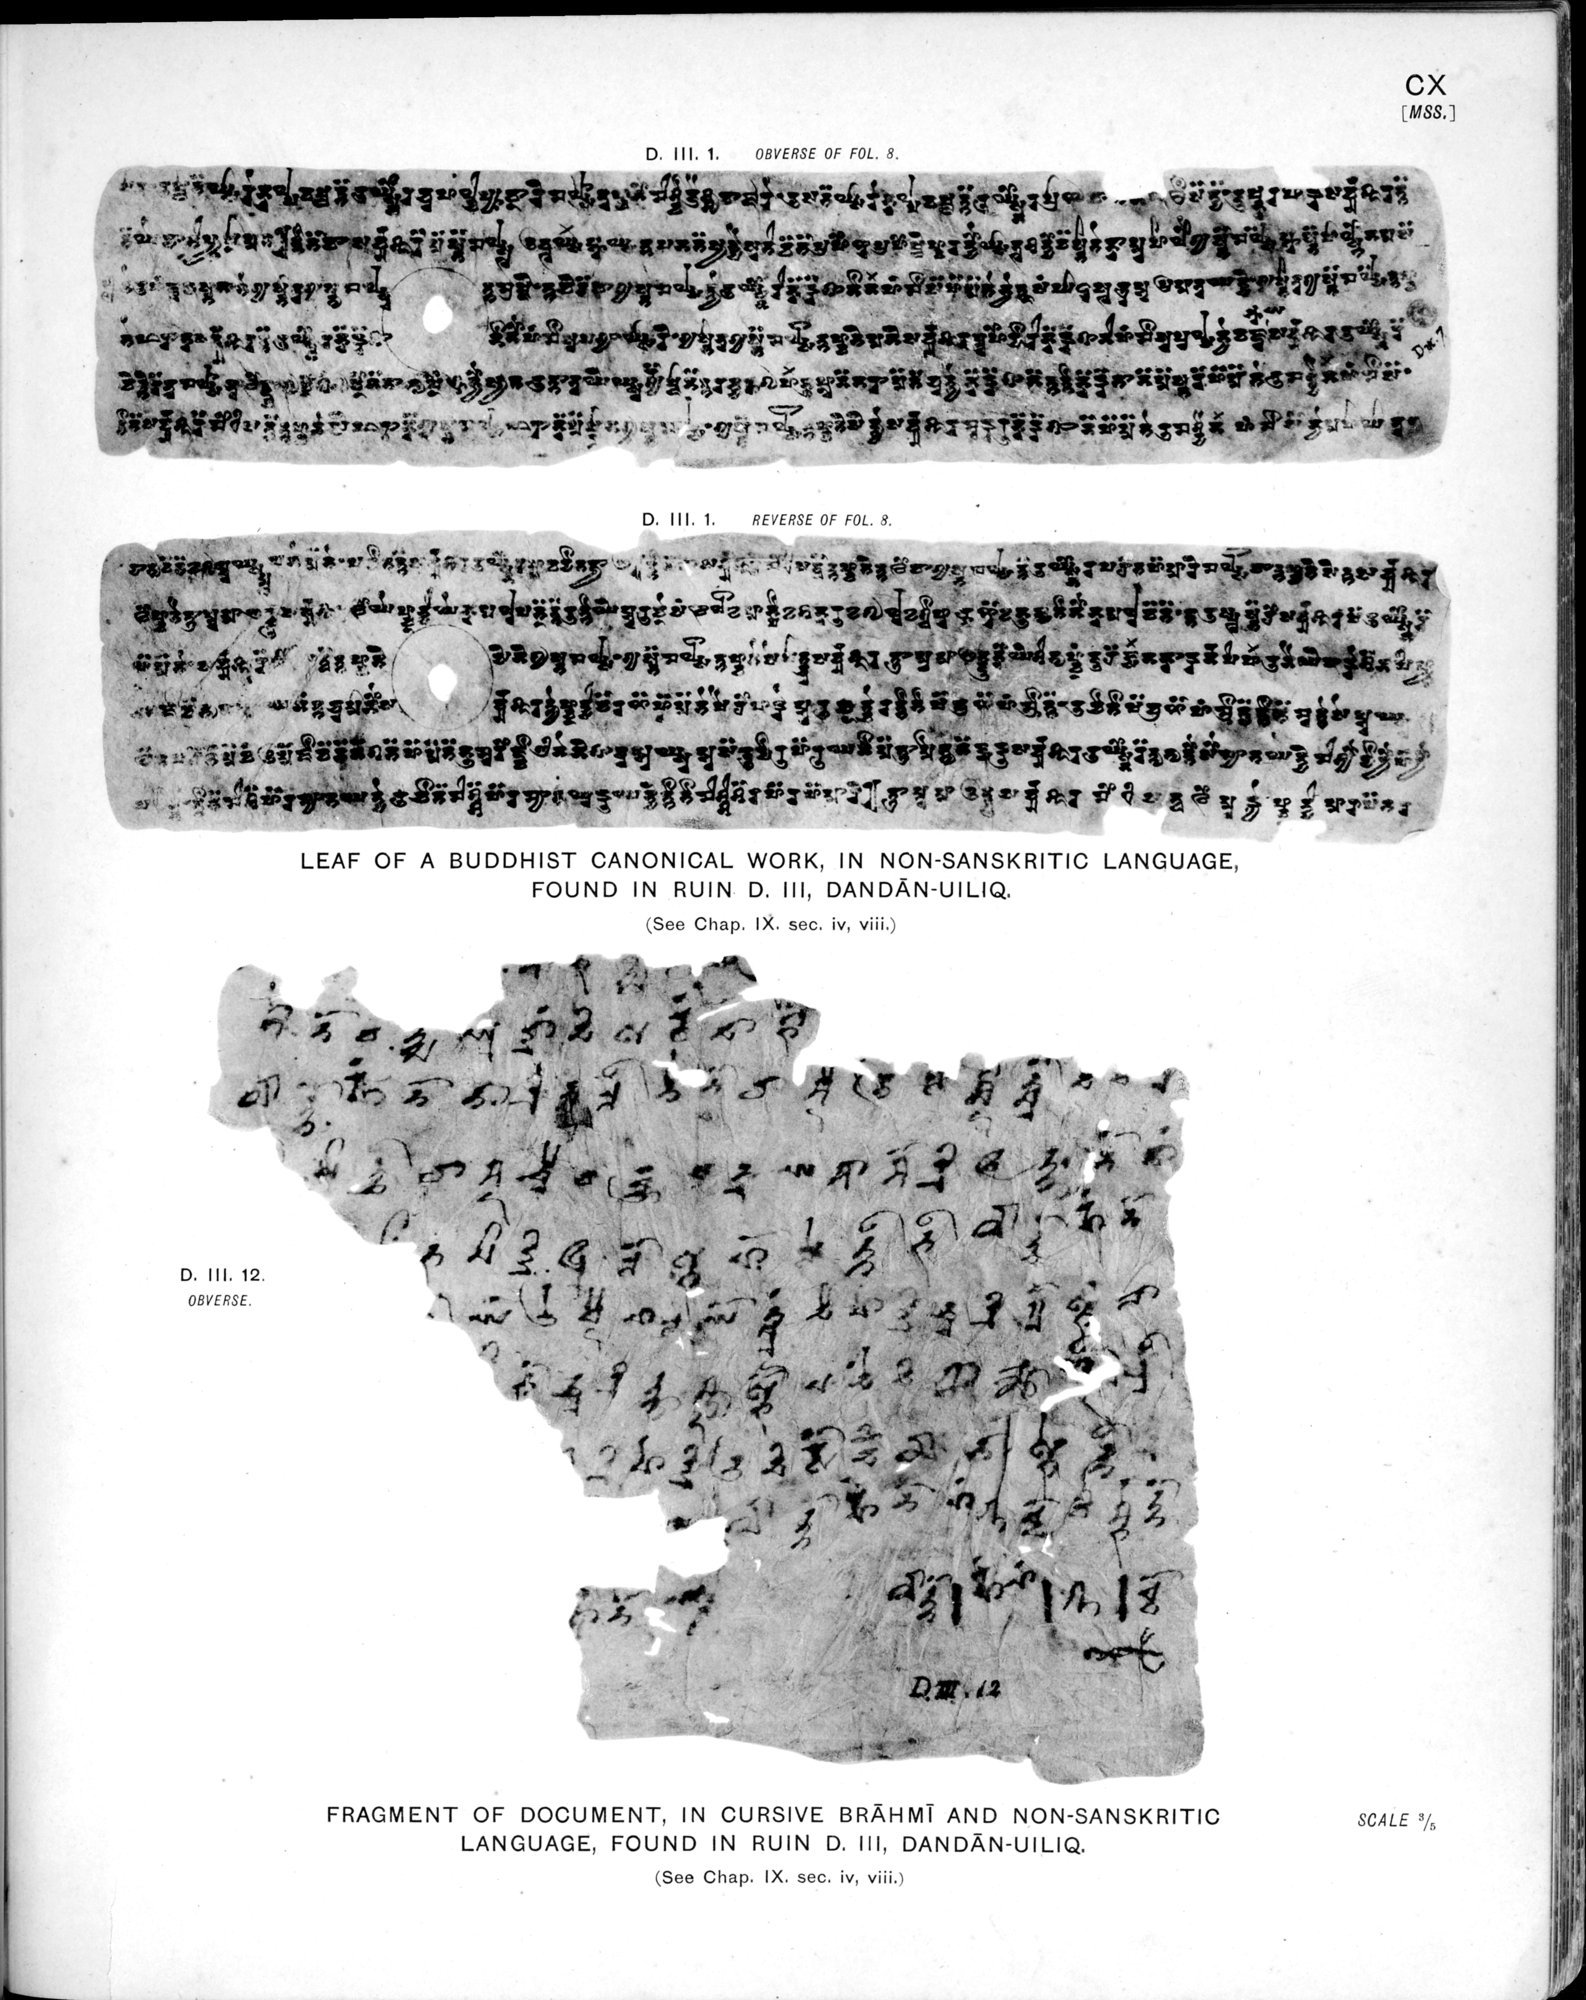 Ancient Khotan : vol.2 / Page 231 (Grayscale High Resolution Image)